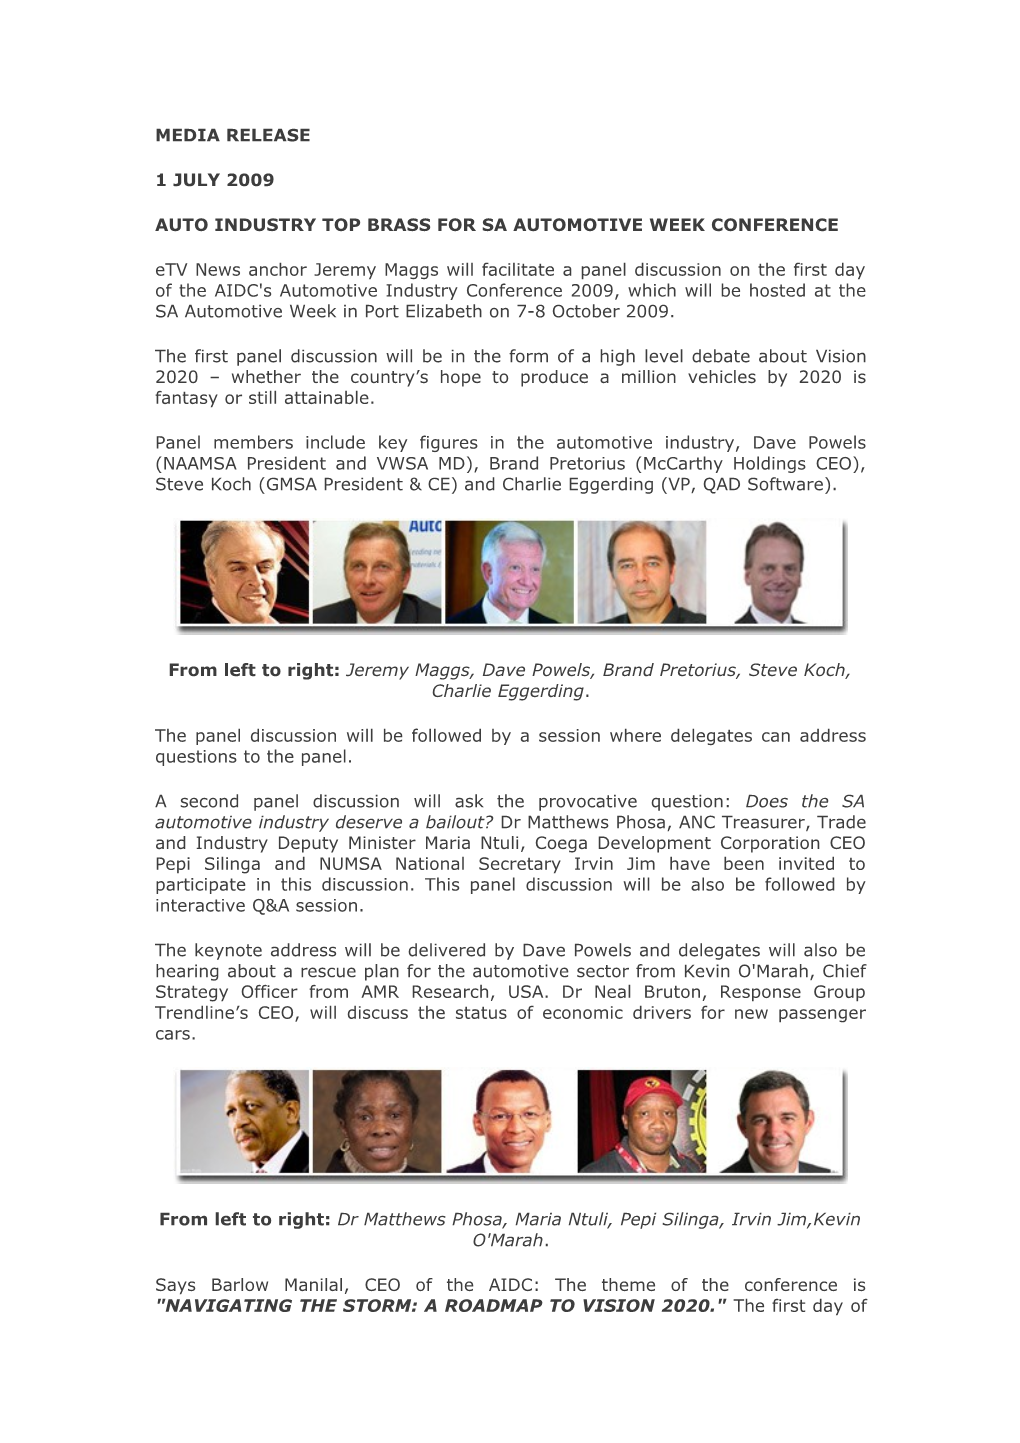 Auto Industry Top Brass for Sa Automotive Week Conference